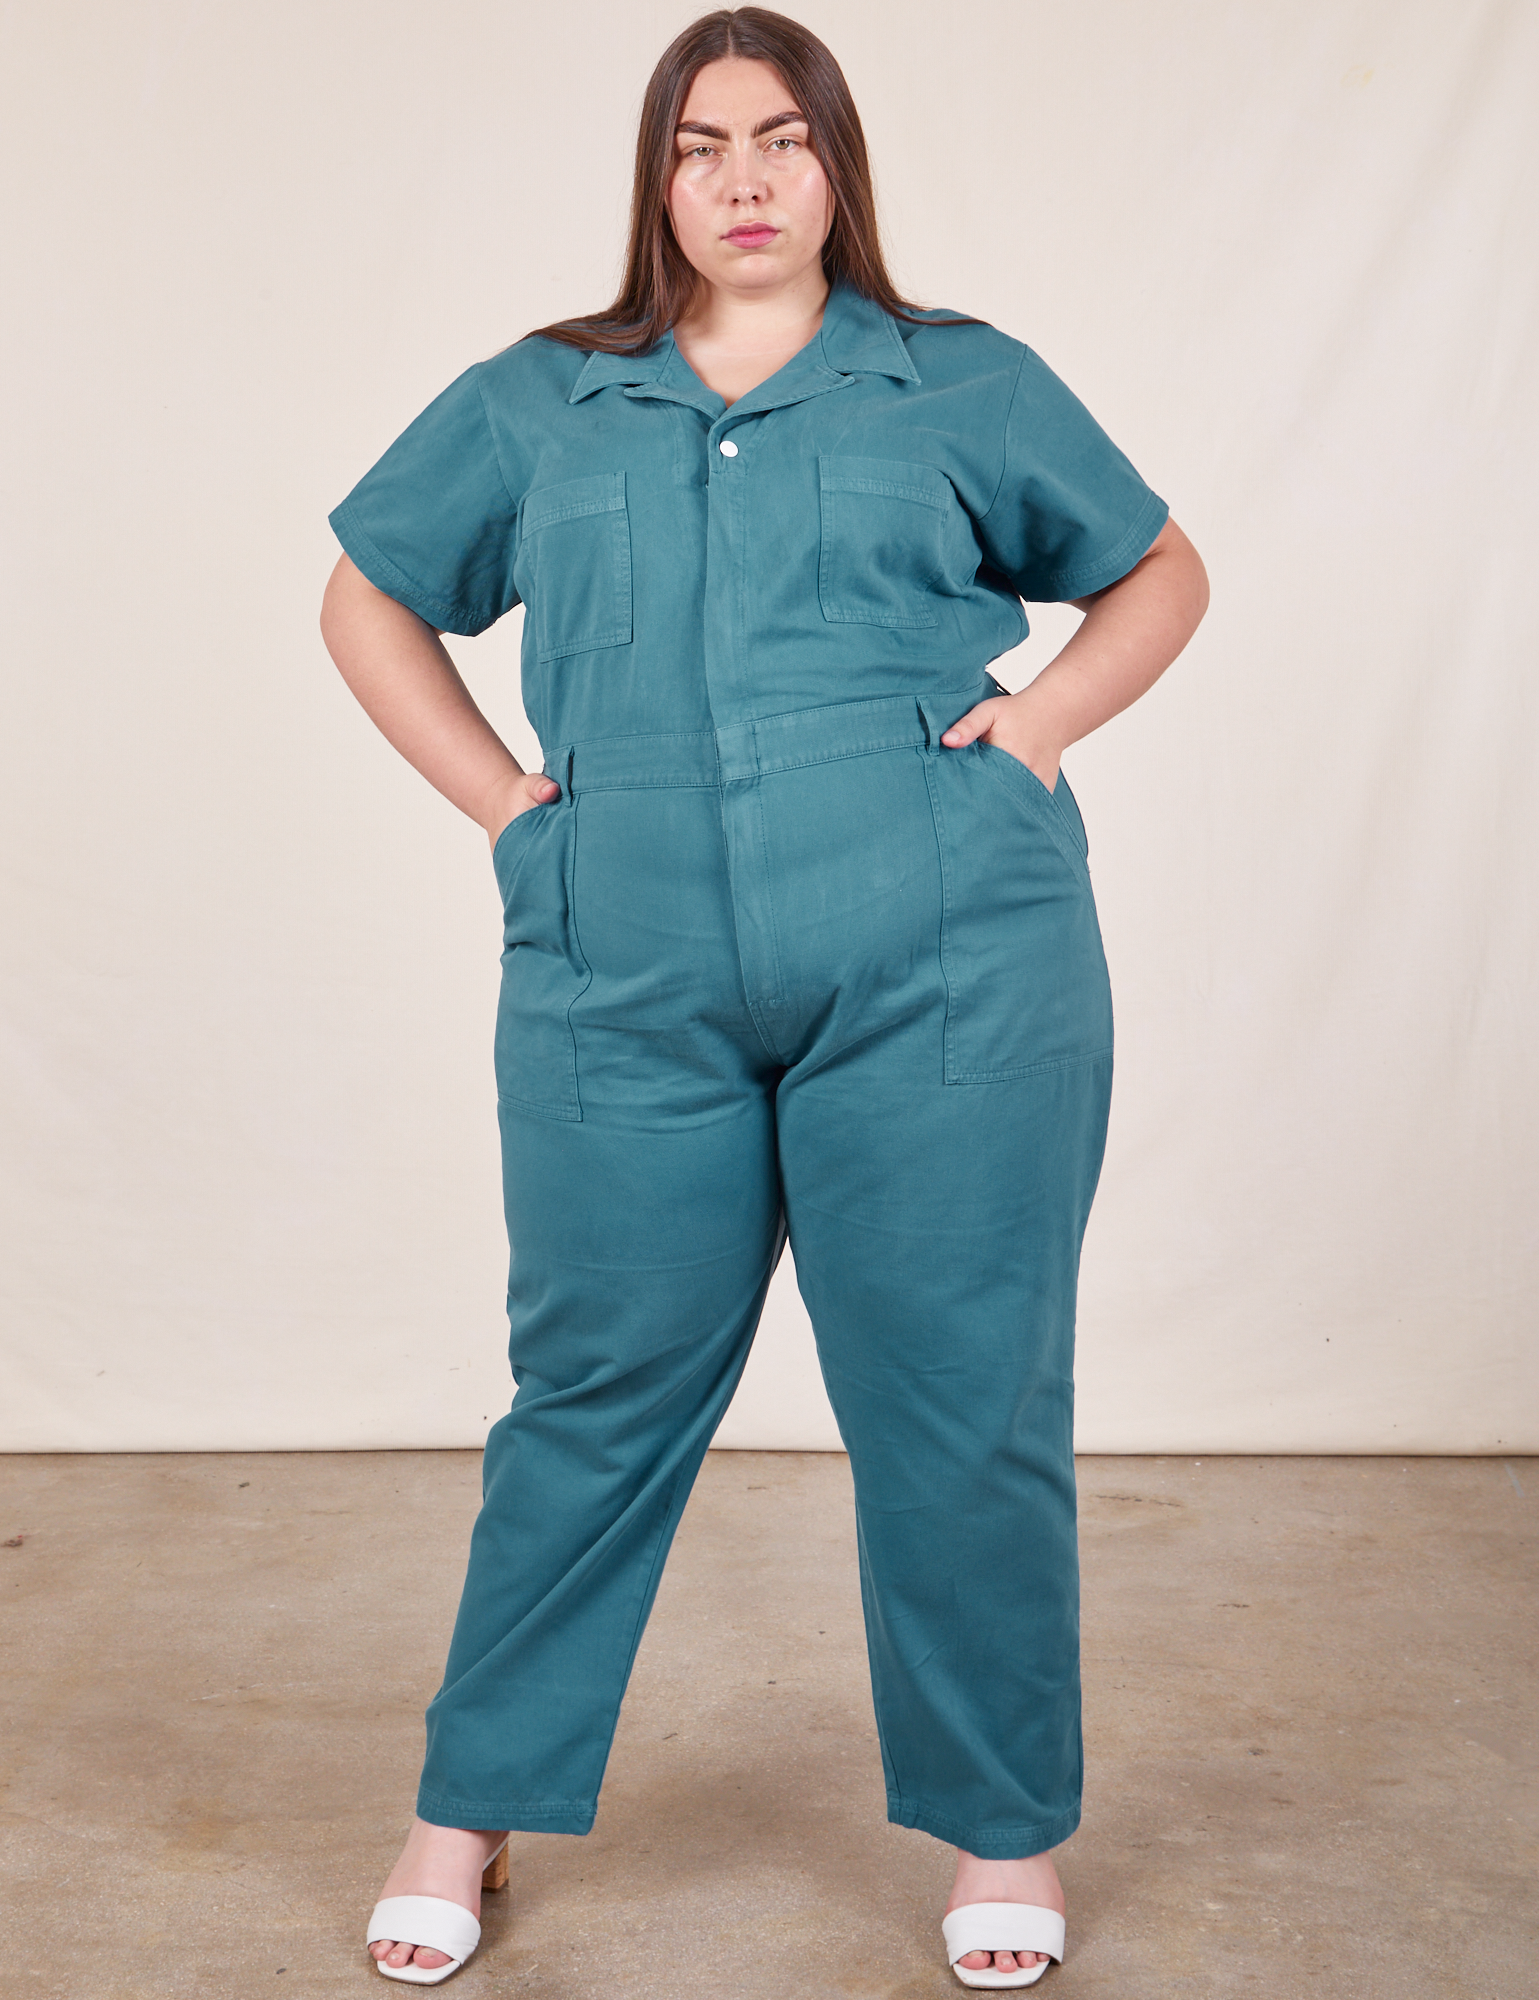 Marielena is 5’8” and wearing 2XL Short Sleeve Jumpsuit in Marine Blue